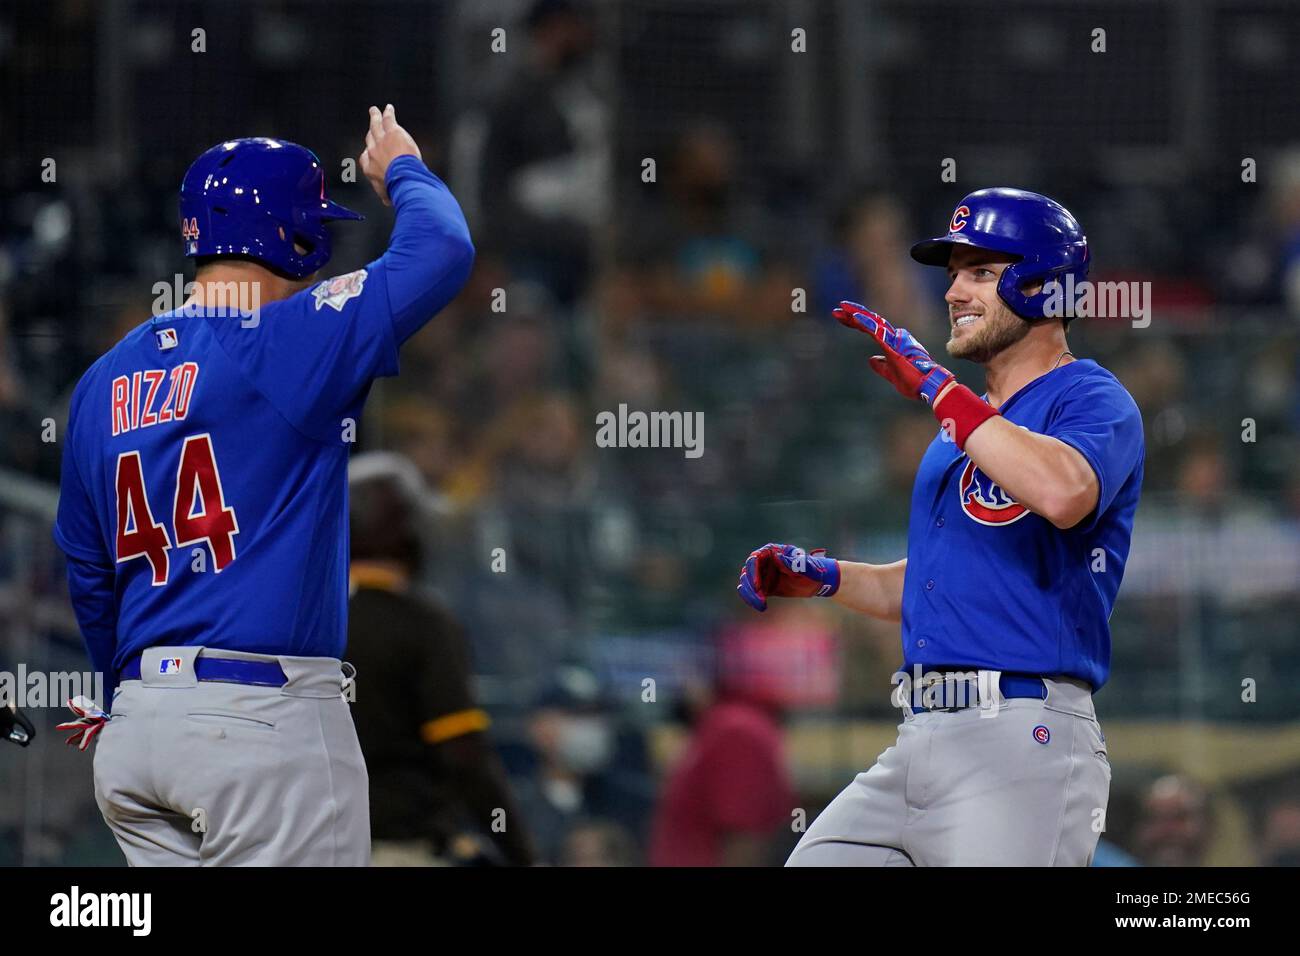 Chicago Cubs' Patrick Wisdom, right, celebrates with Anthony Rizzo